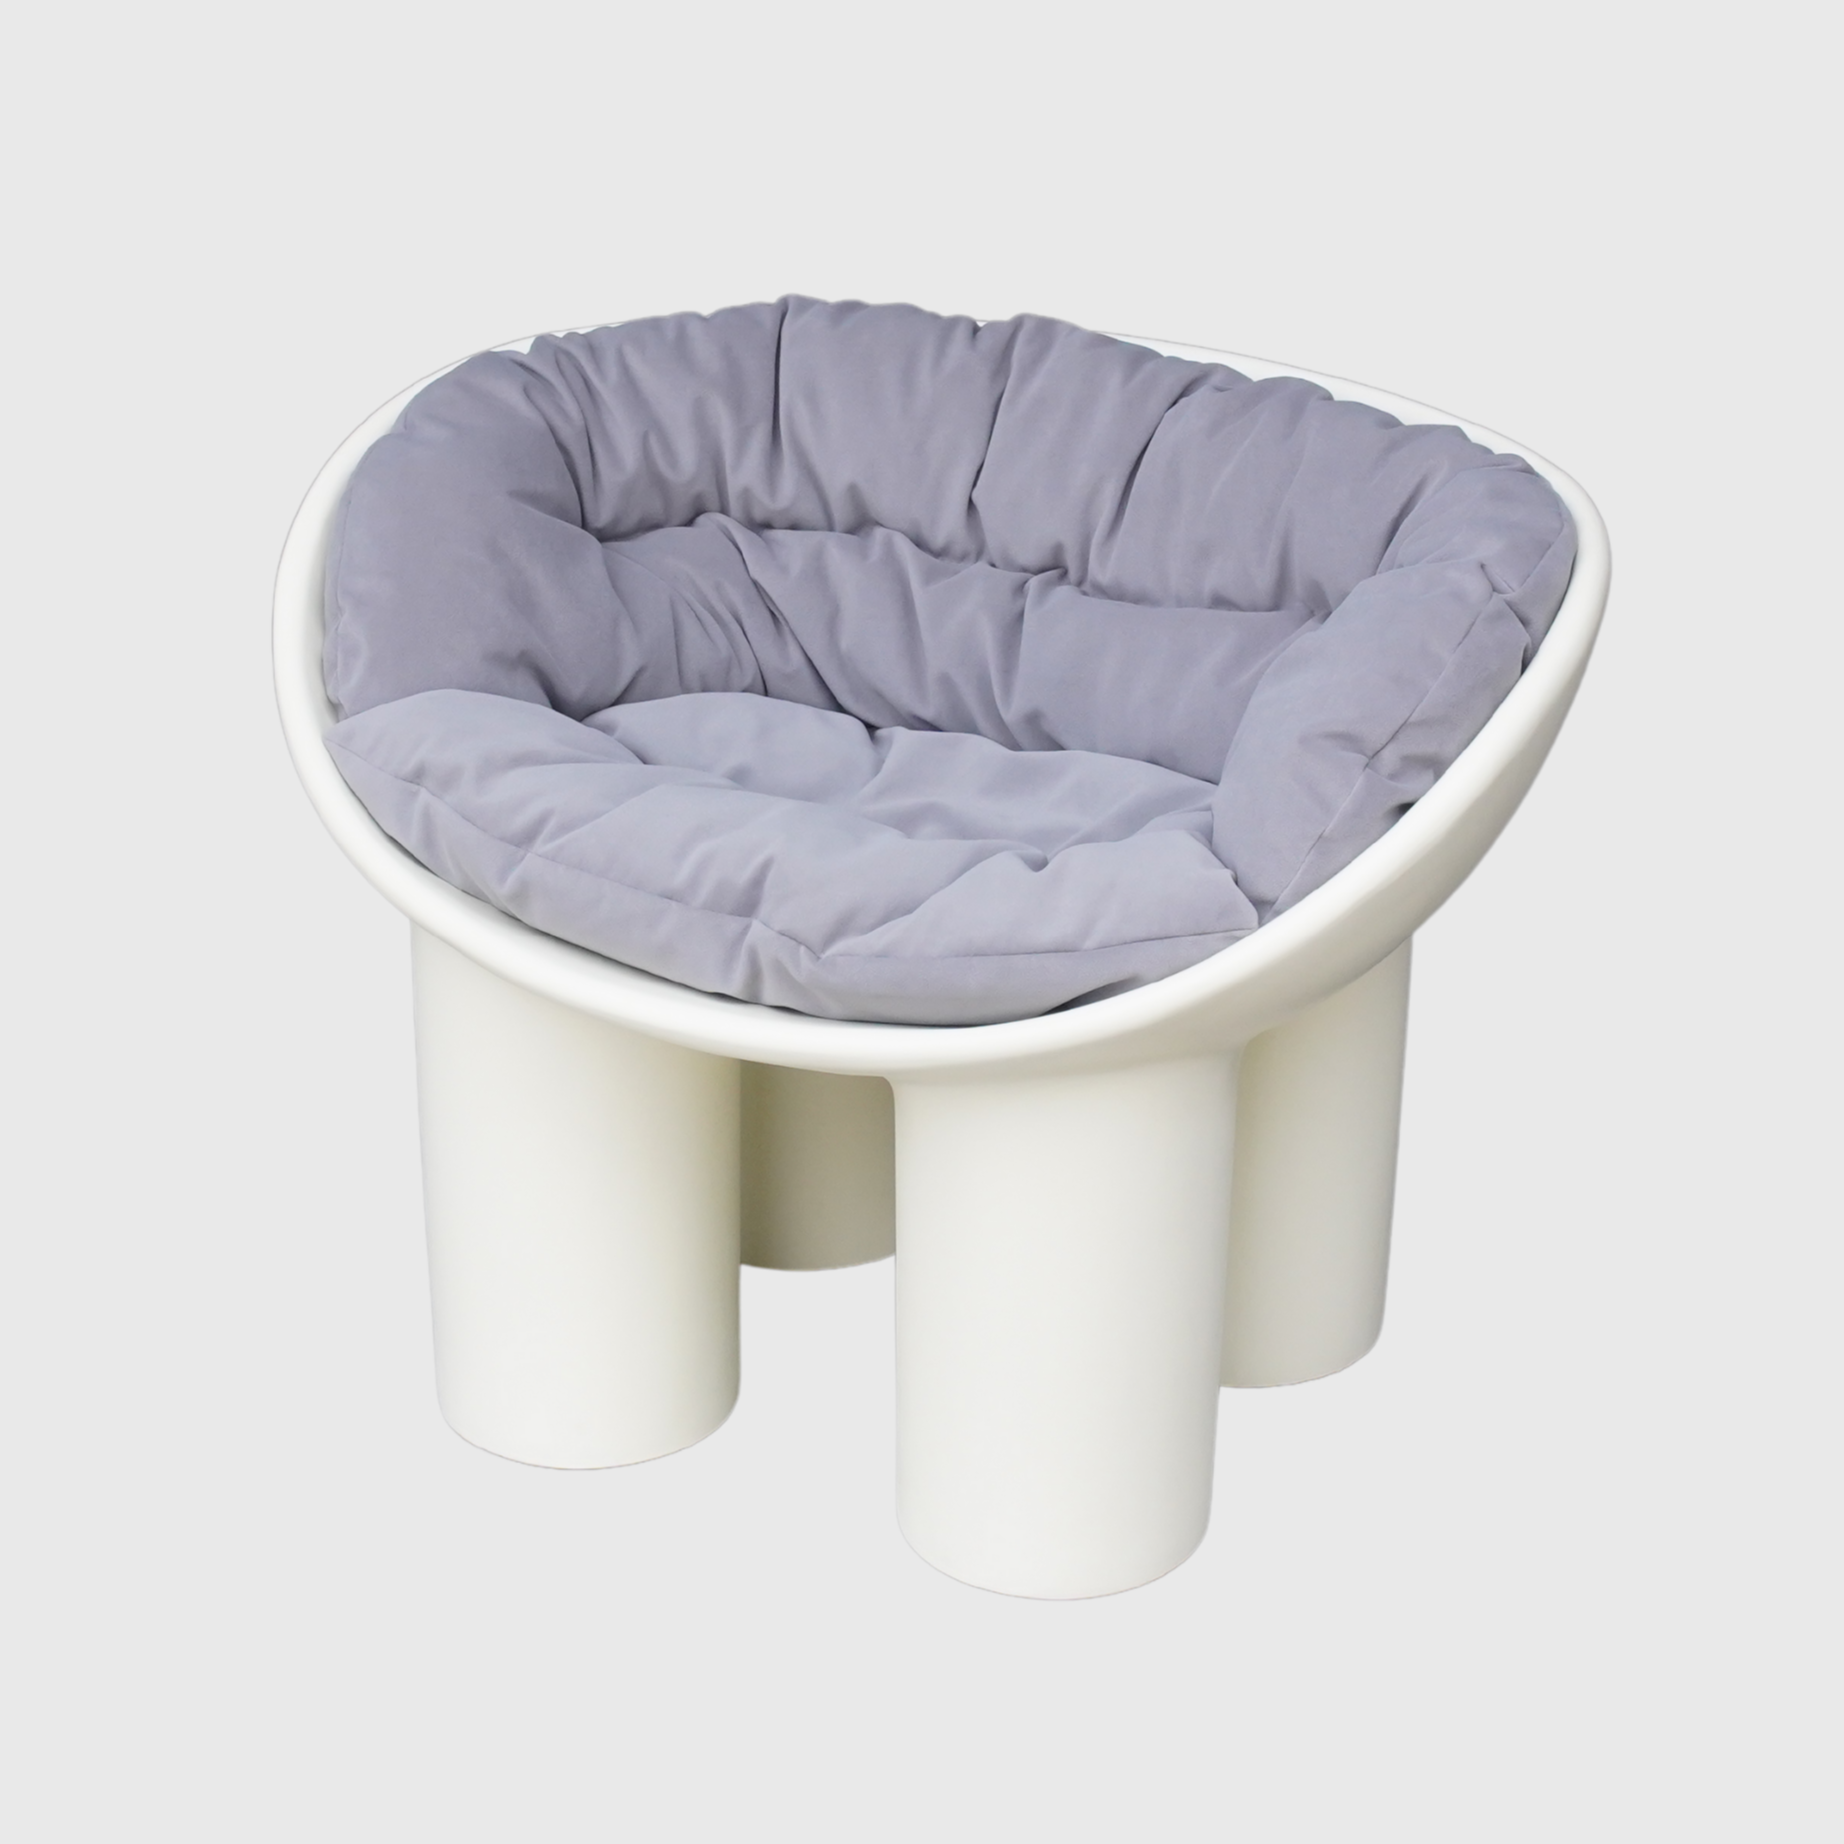 Roly Poly Chair Cushion